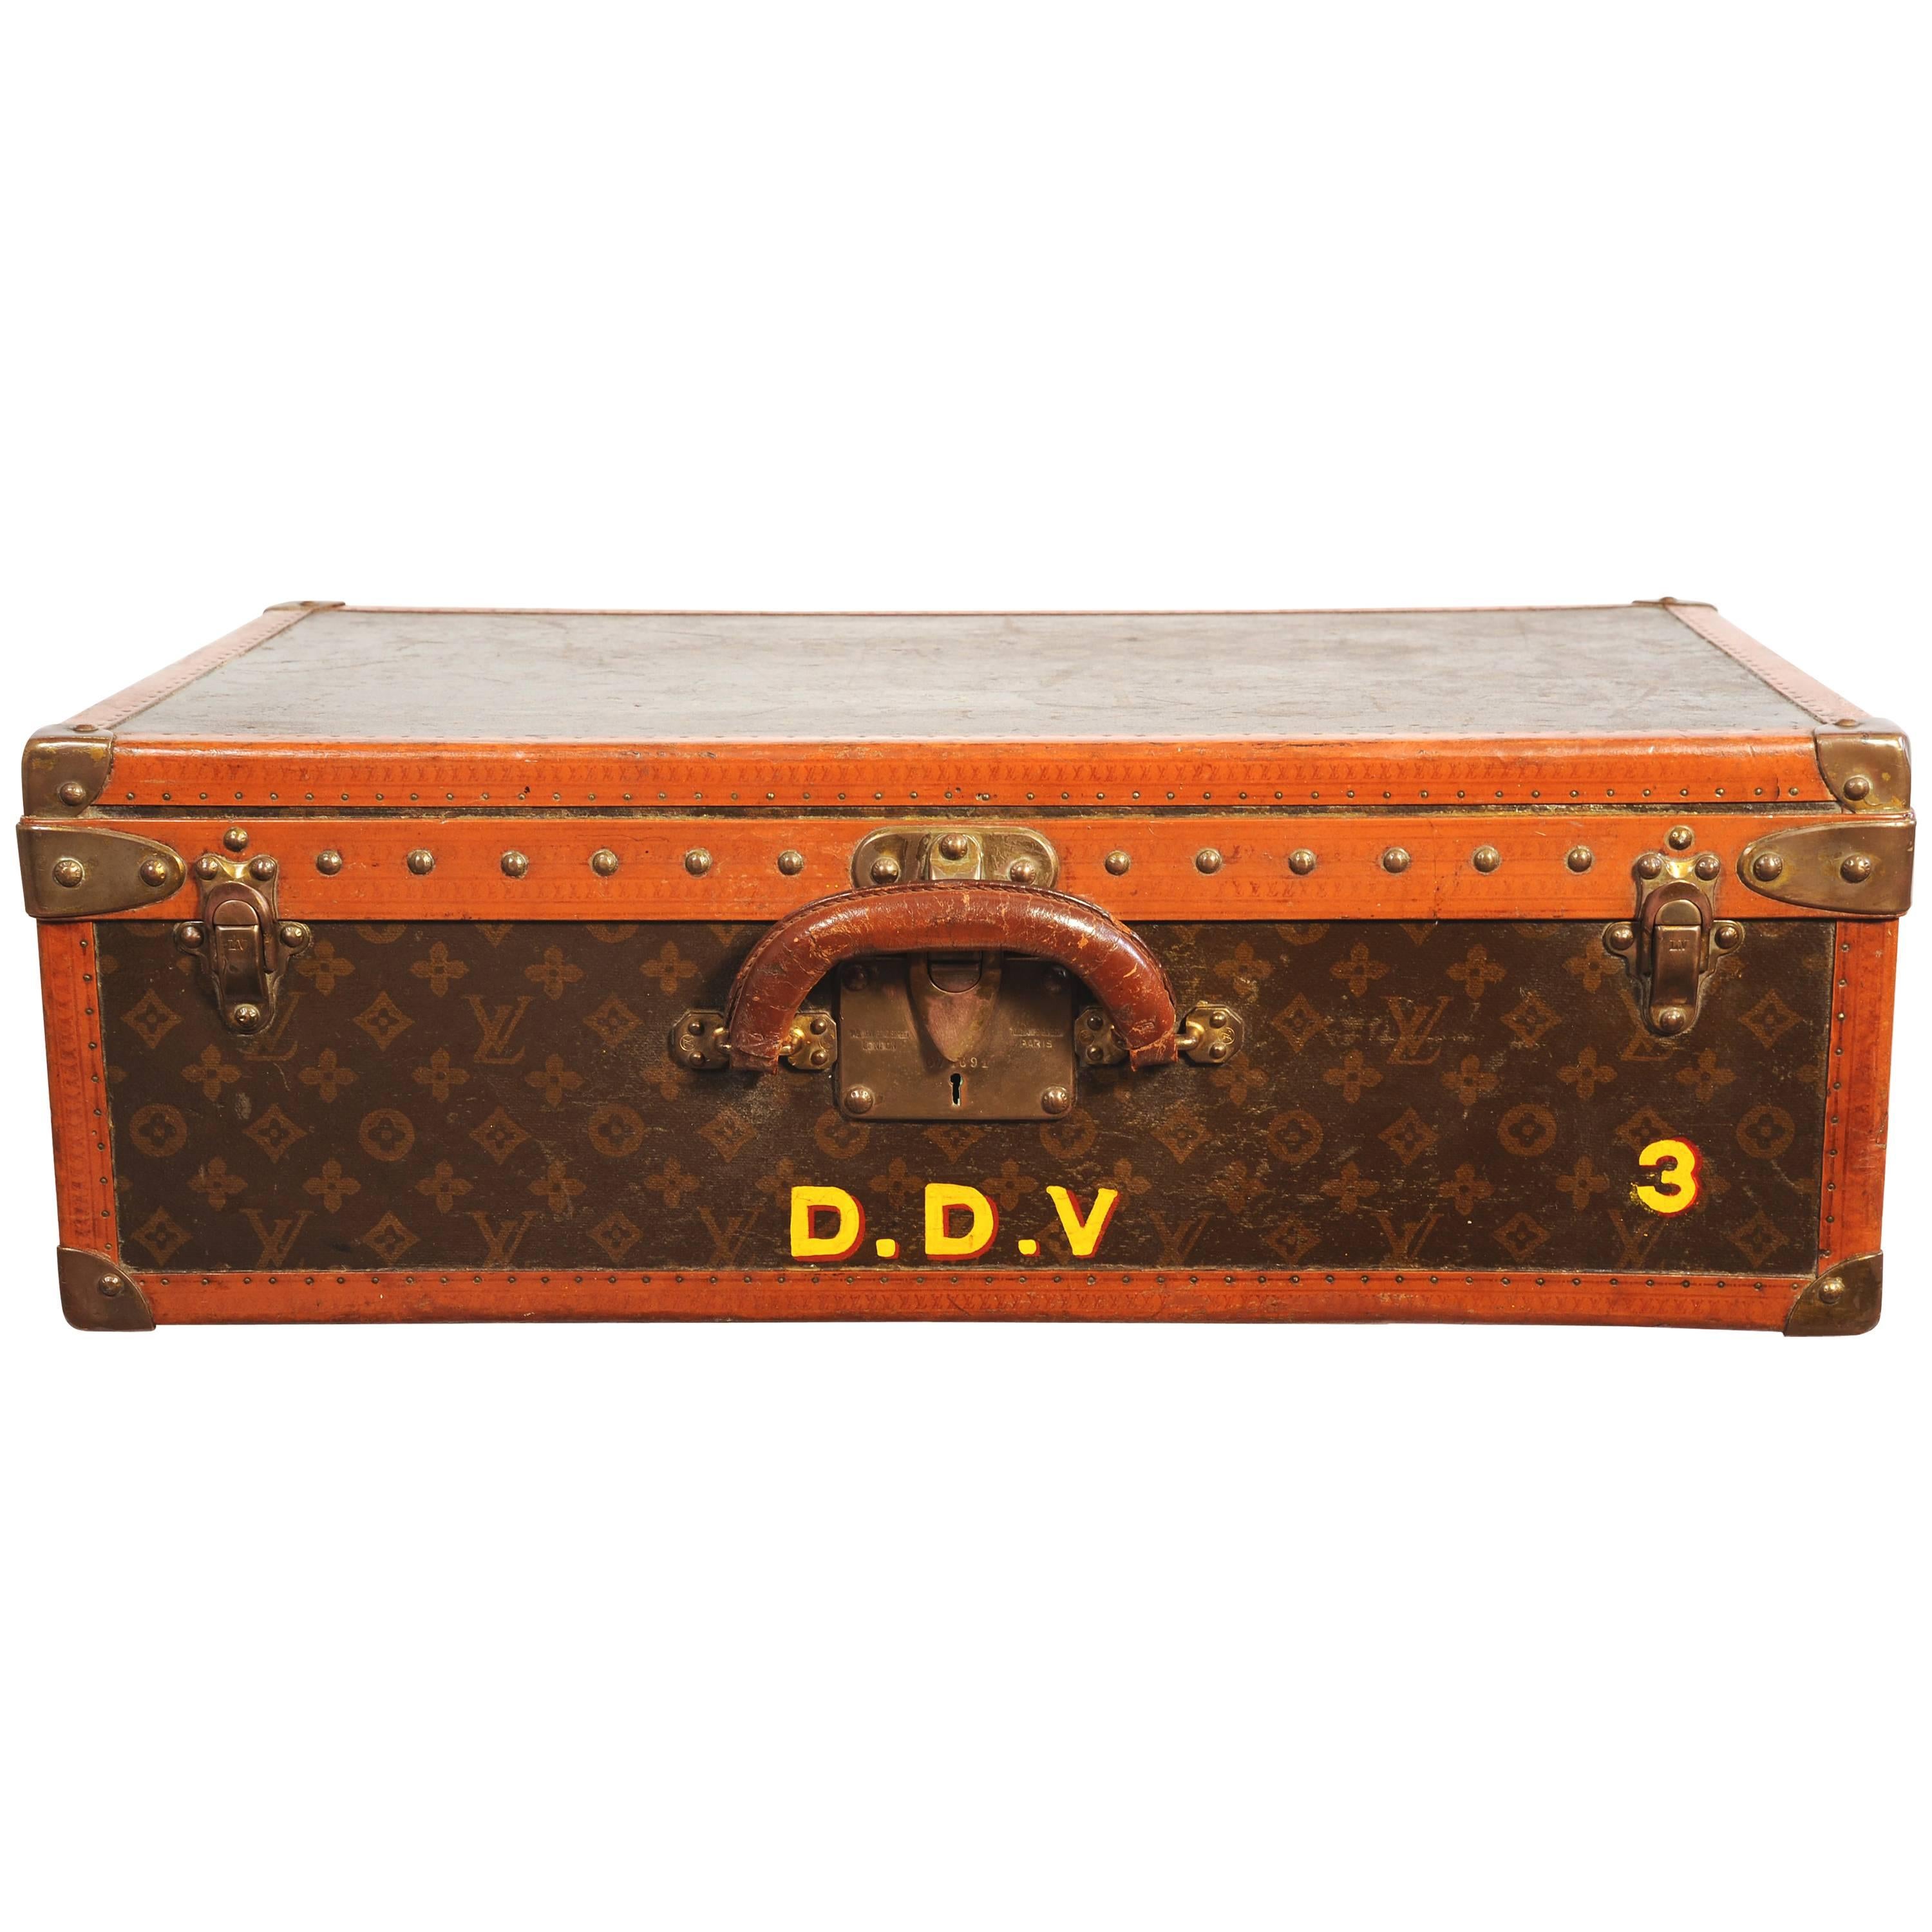  Louis Vuitton Suitcase Owned by Diana Vreeland Iconic Piece of Fashion History